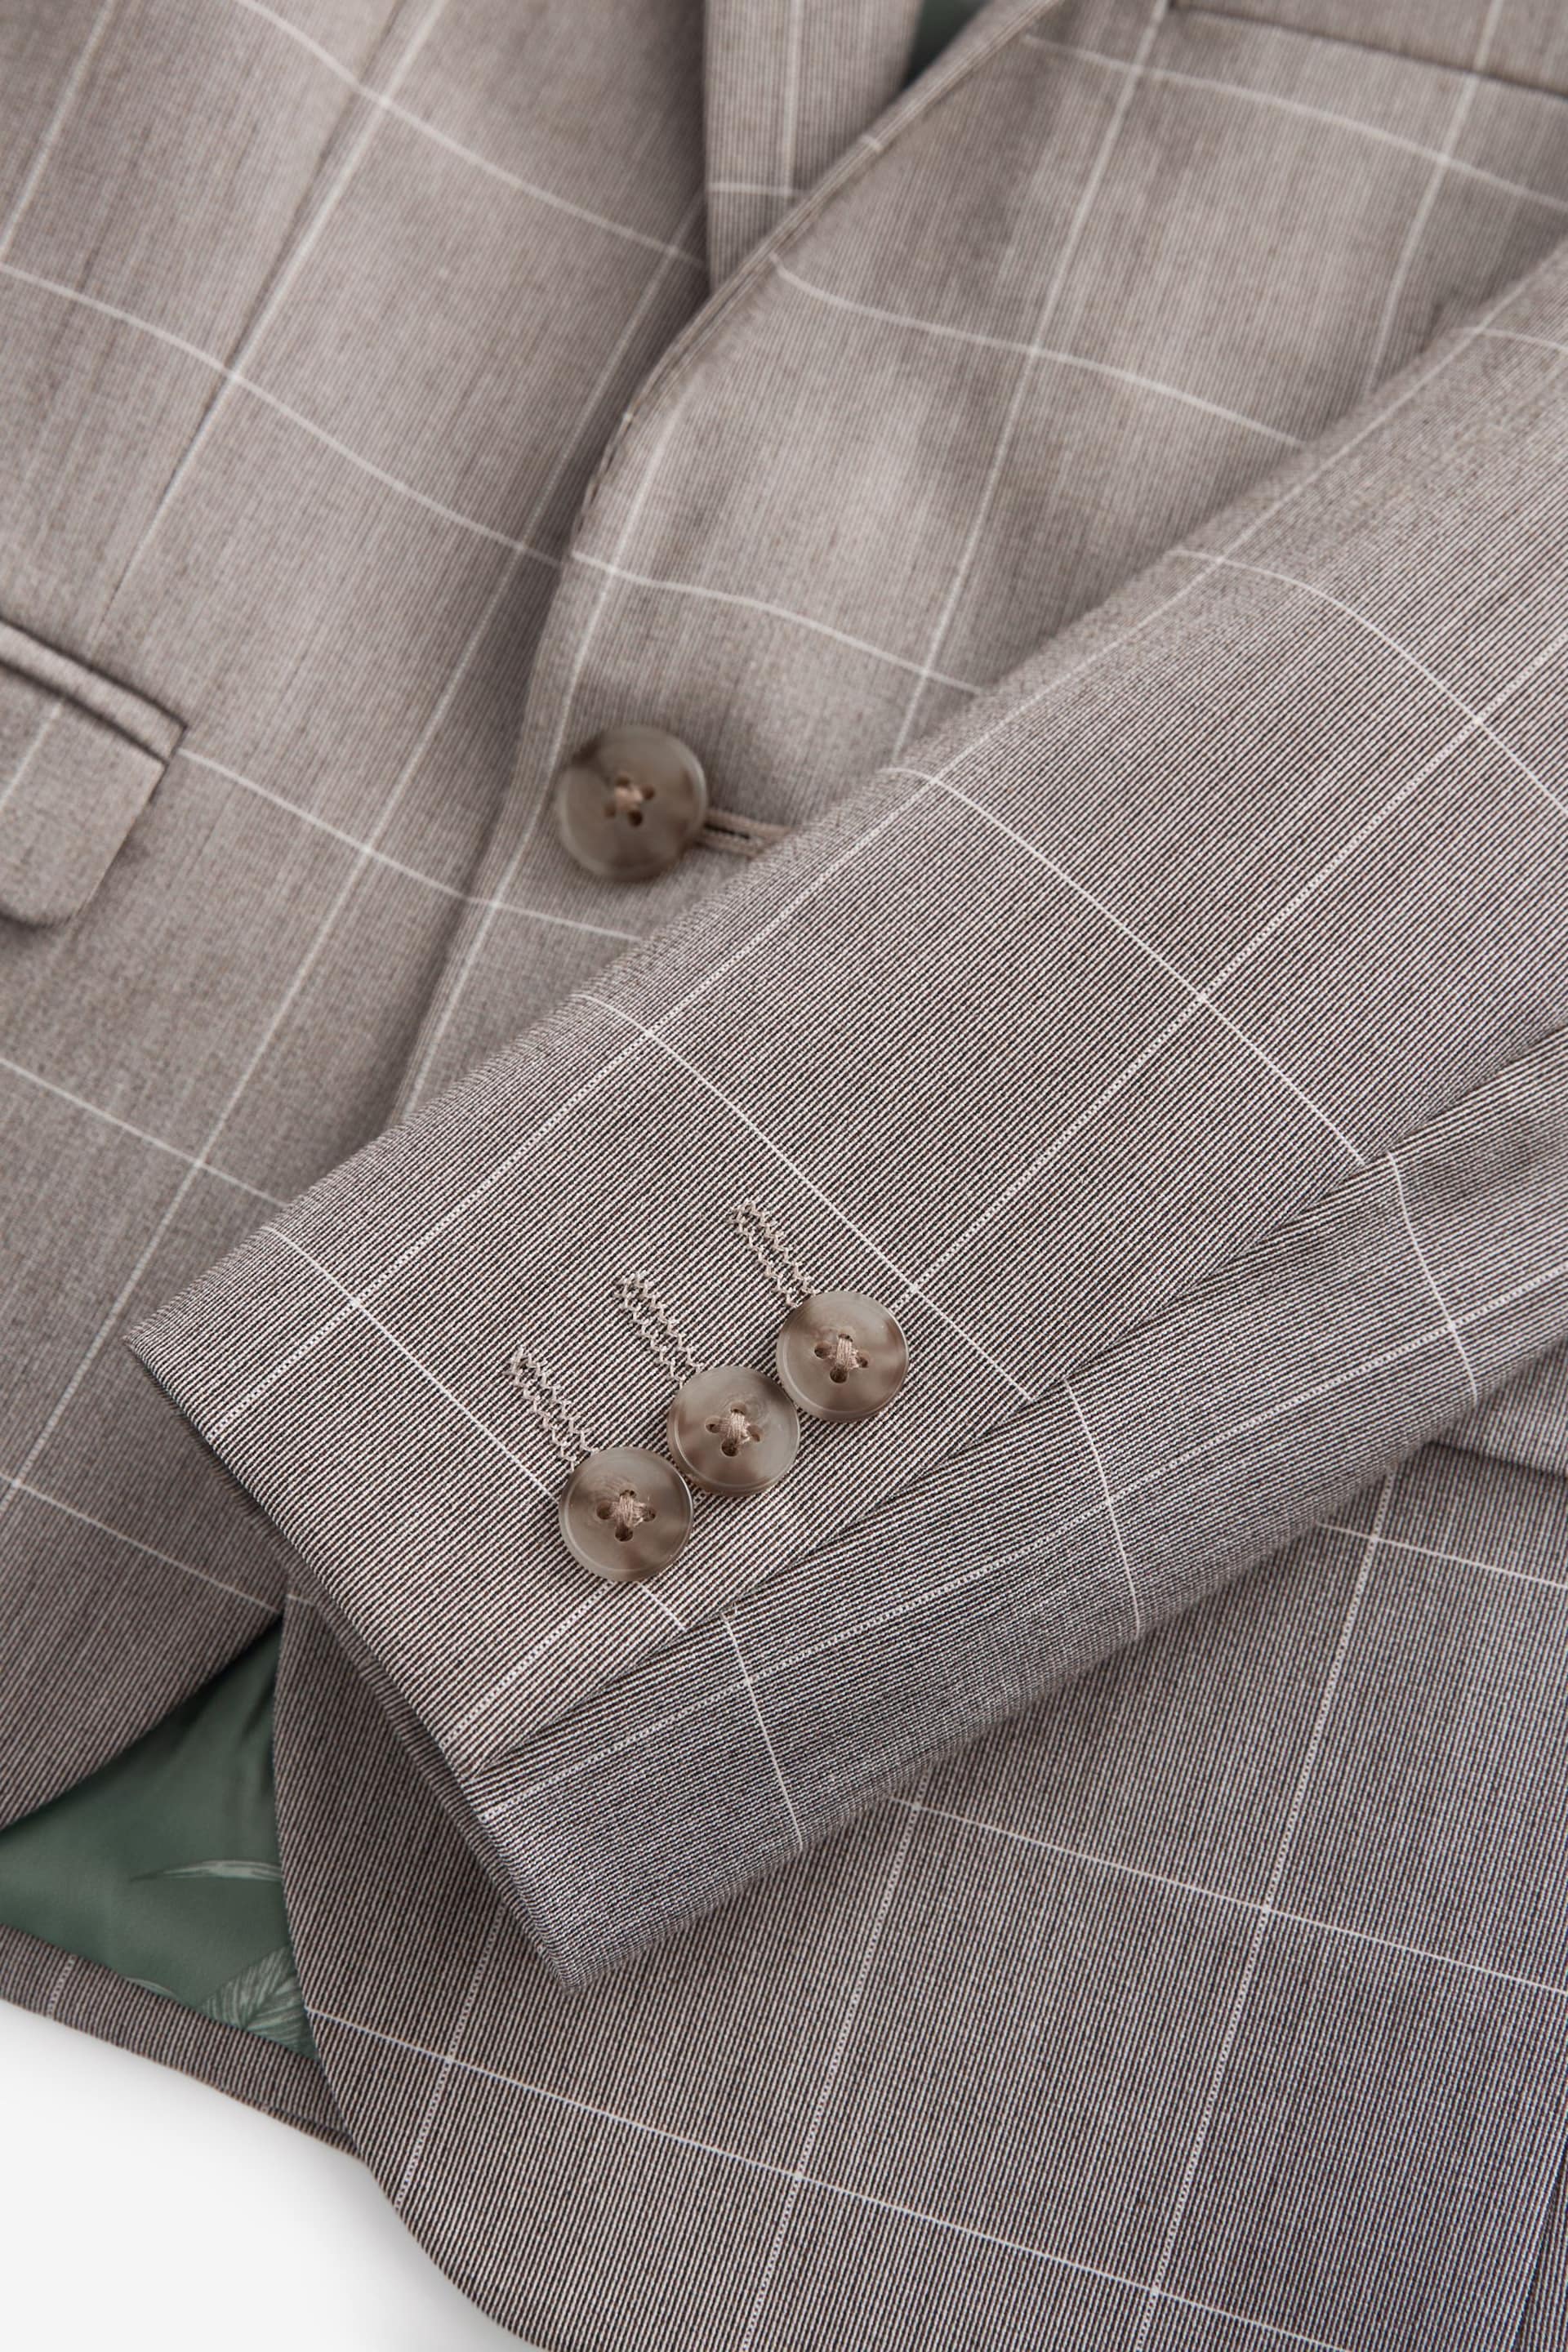 Neutral Check Suit Jacket (12mths-16yrs) - Image 6 of 7